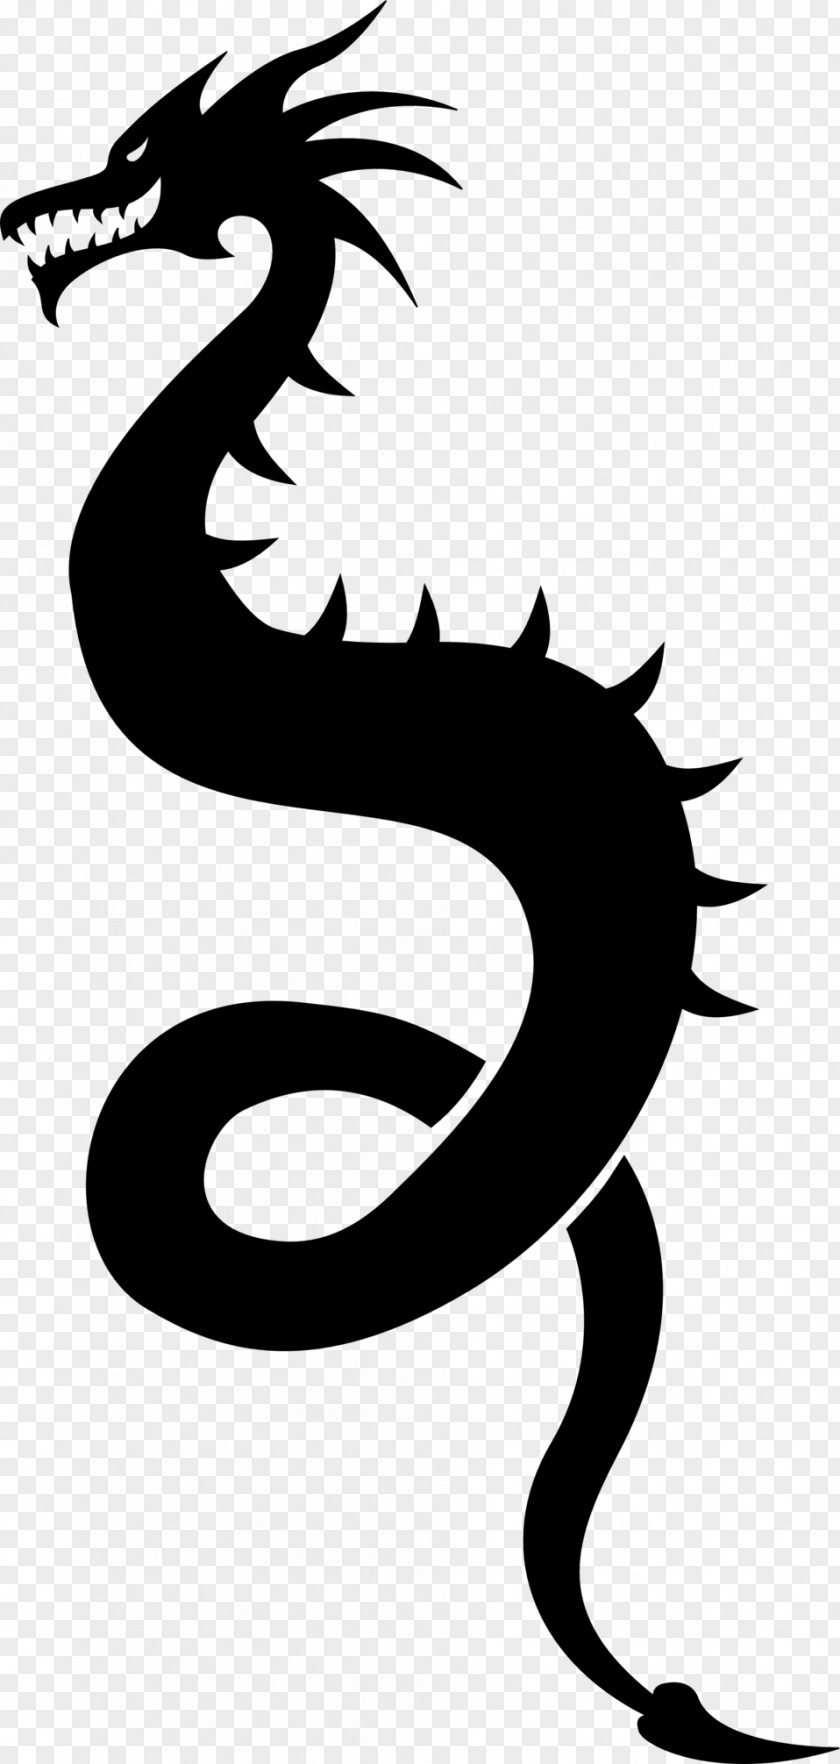 China Chinese Dragon Silhouette PNG